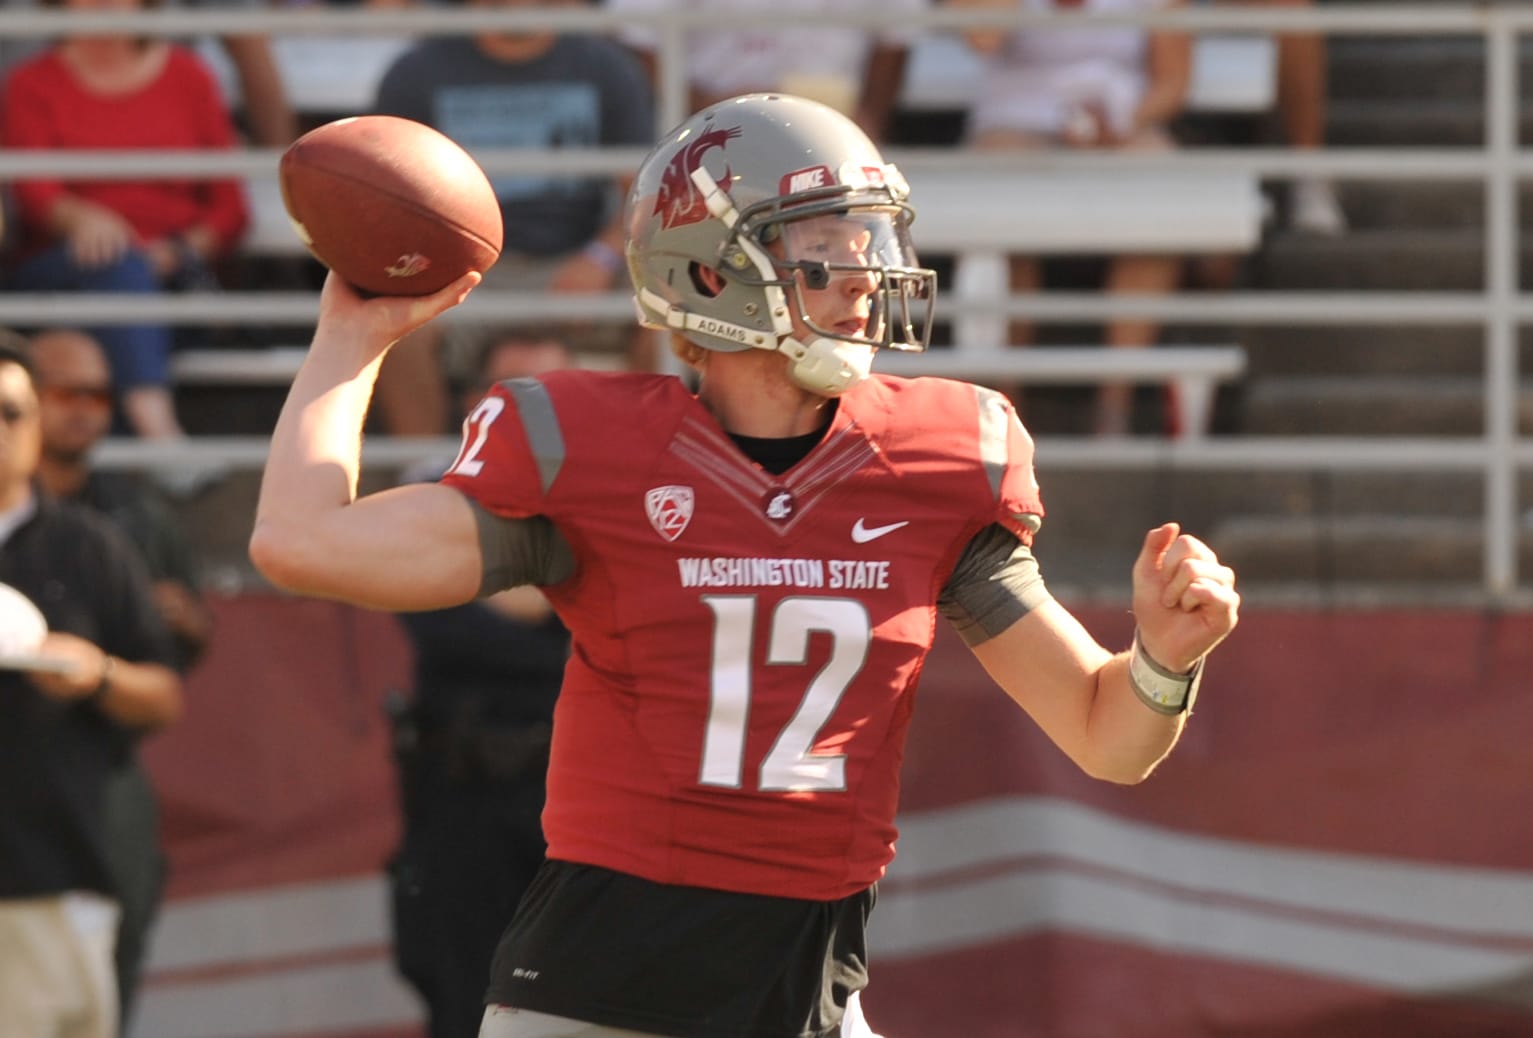 Washington State quarterback Connor Halliday went 25-of-41 for 326 yards and three touchdowns to lead the Crimson team on Saturday. (Washington State Athletic Dept.